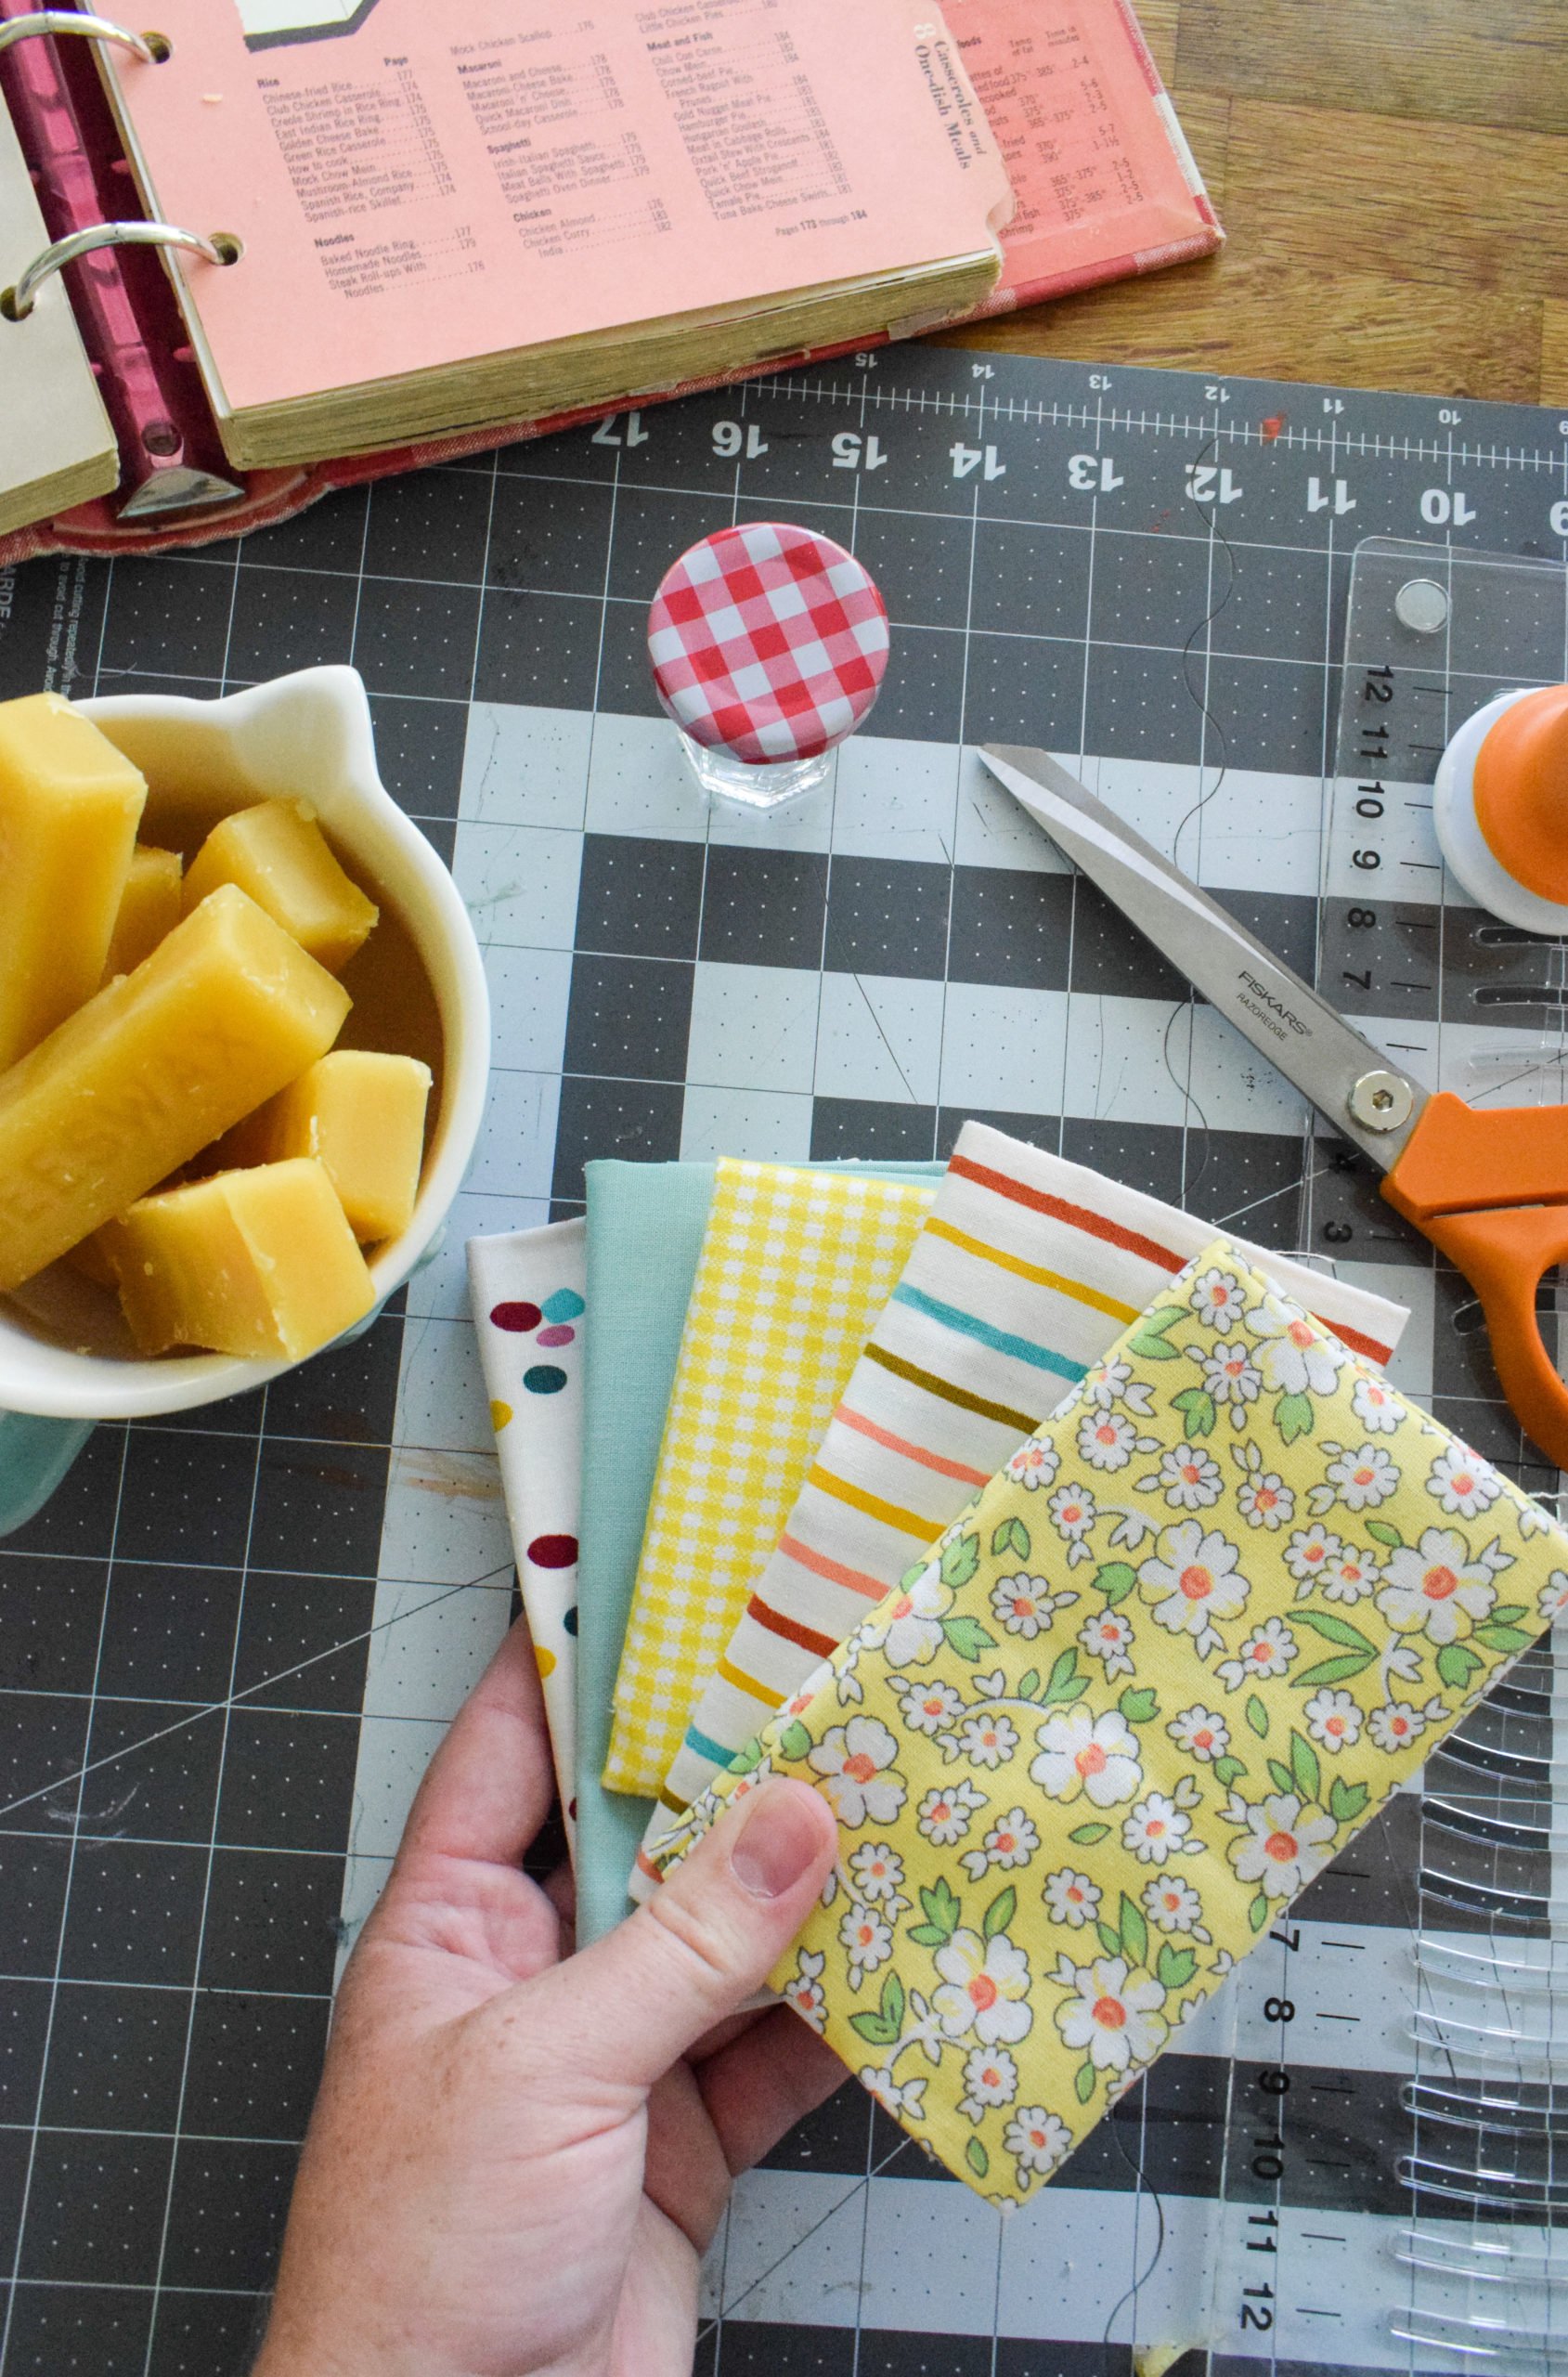 DIY beeswax food wrap is an easy first step you can take towards reducing your household waste. Bonus, it's easy to make!